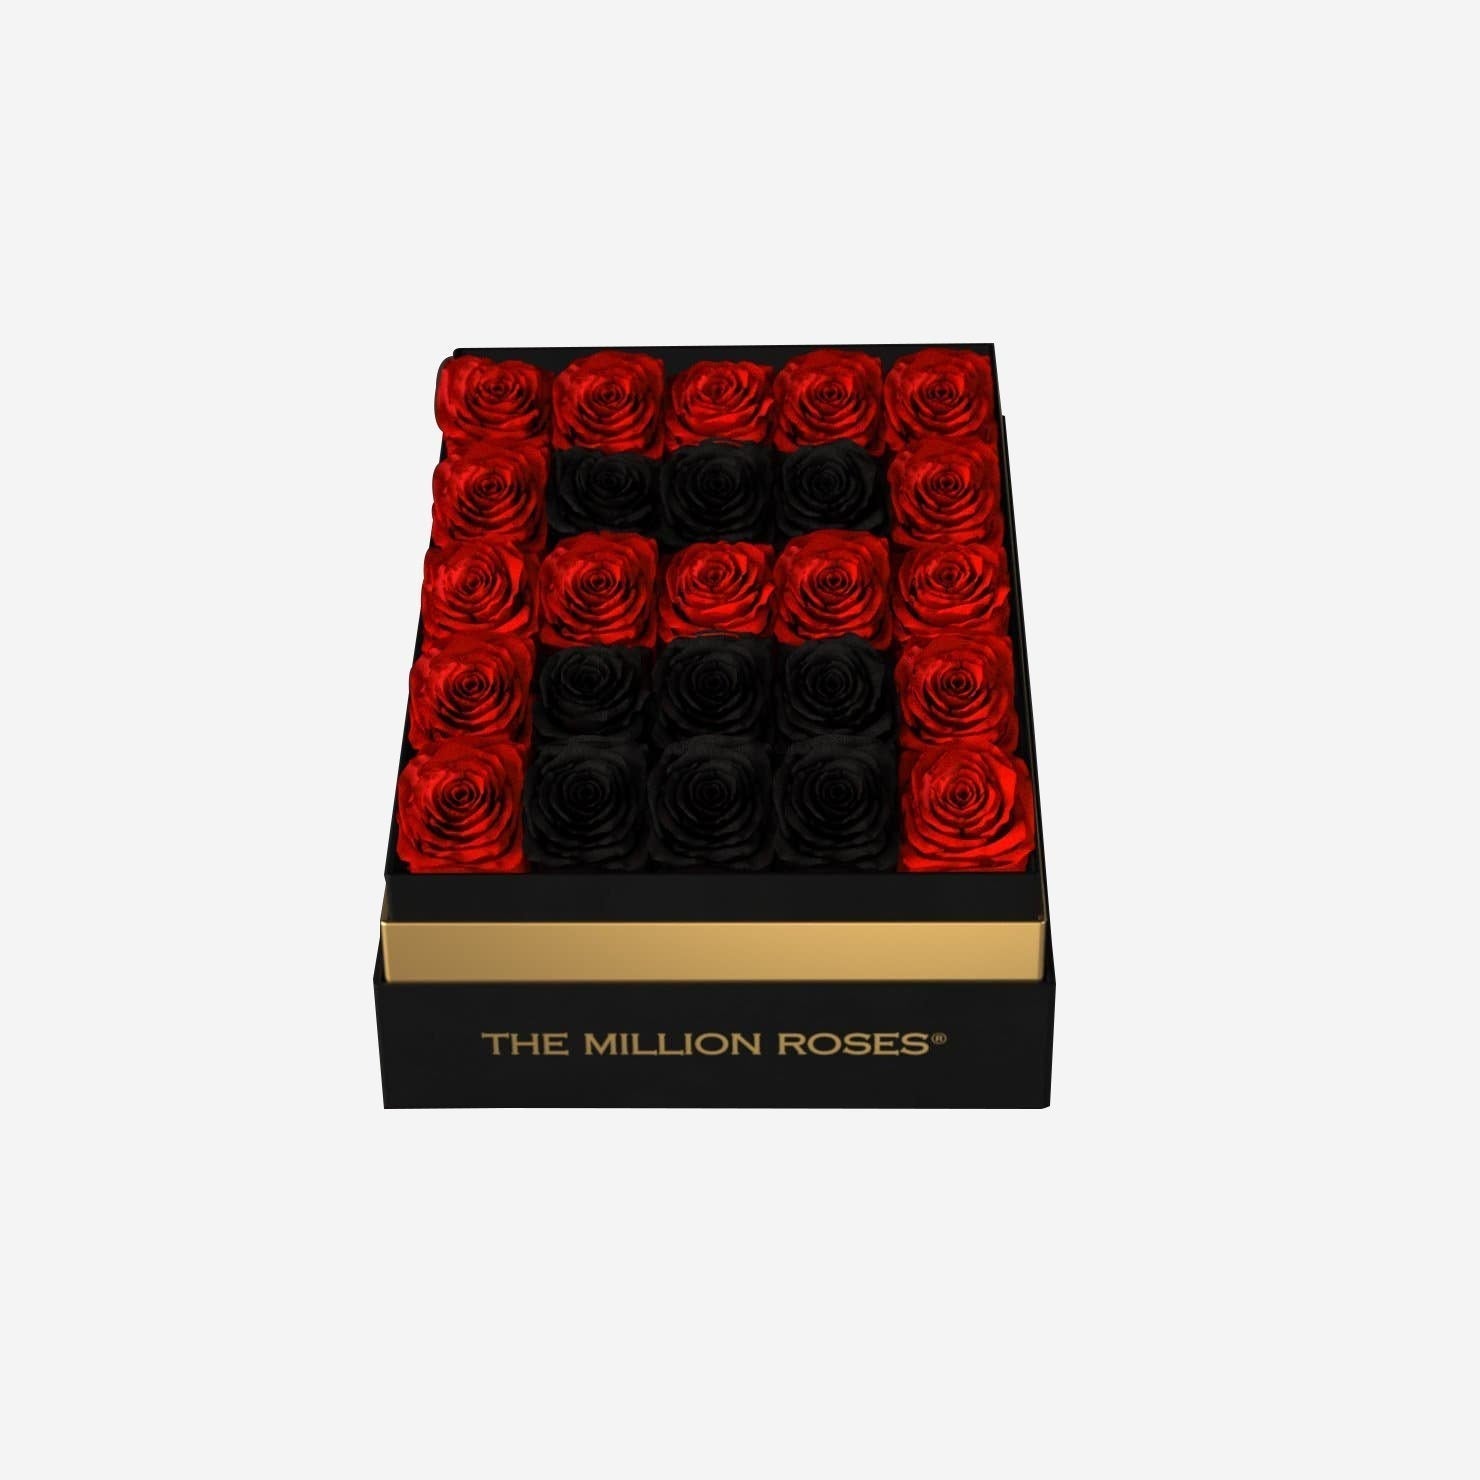 One In A Million™ Square Black Box | Red & Black Roses | Heart & Alphanumeric - The Million Roses